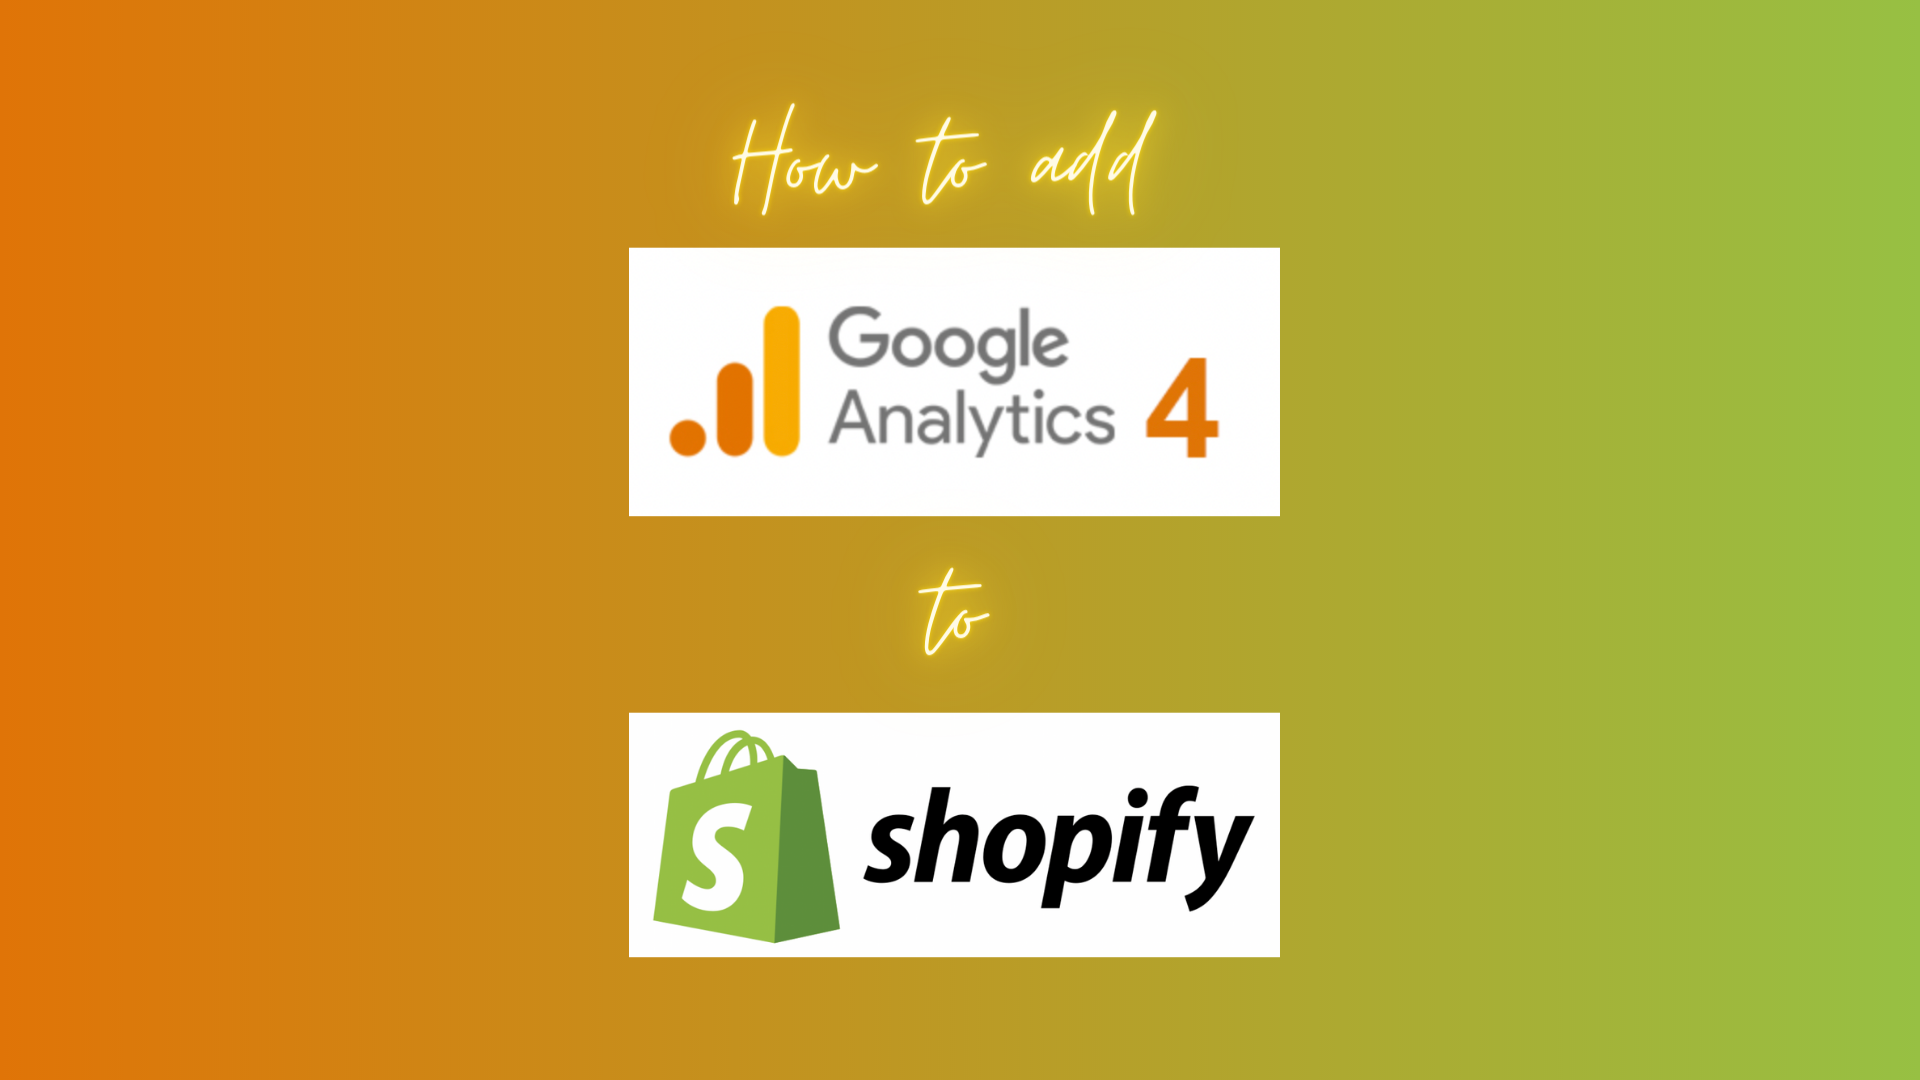 Google Analytics and Shopify logos on blended orange and green background